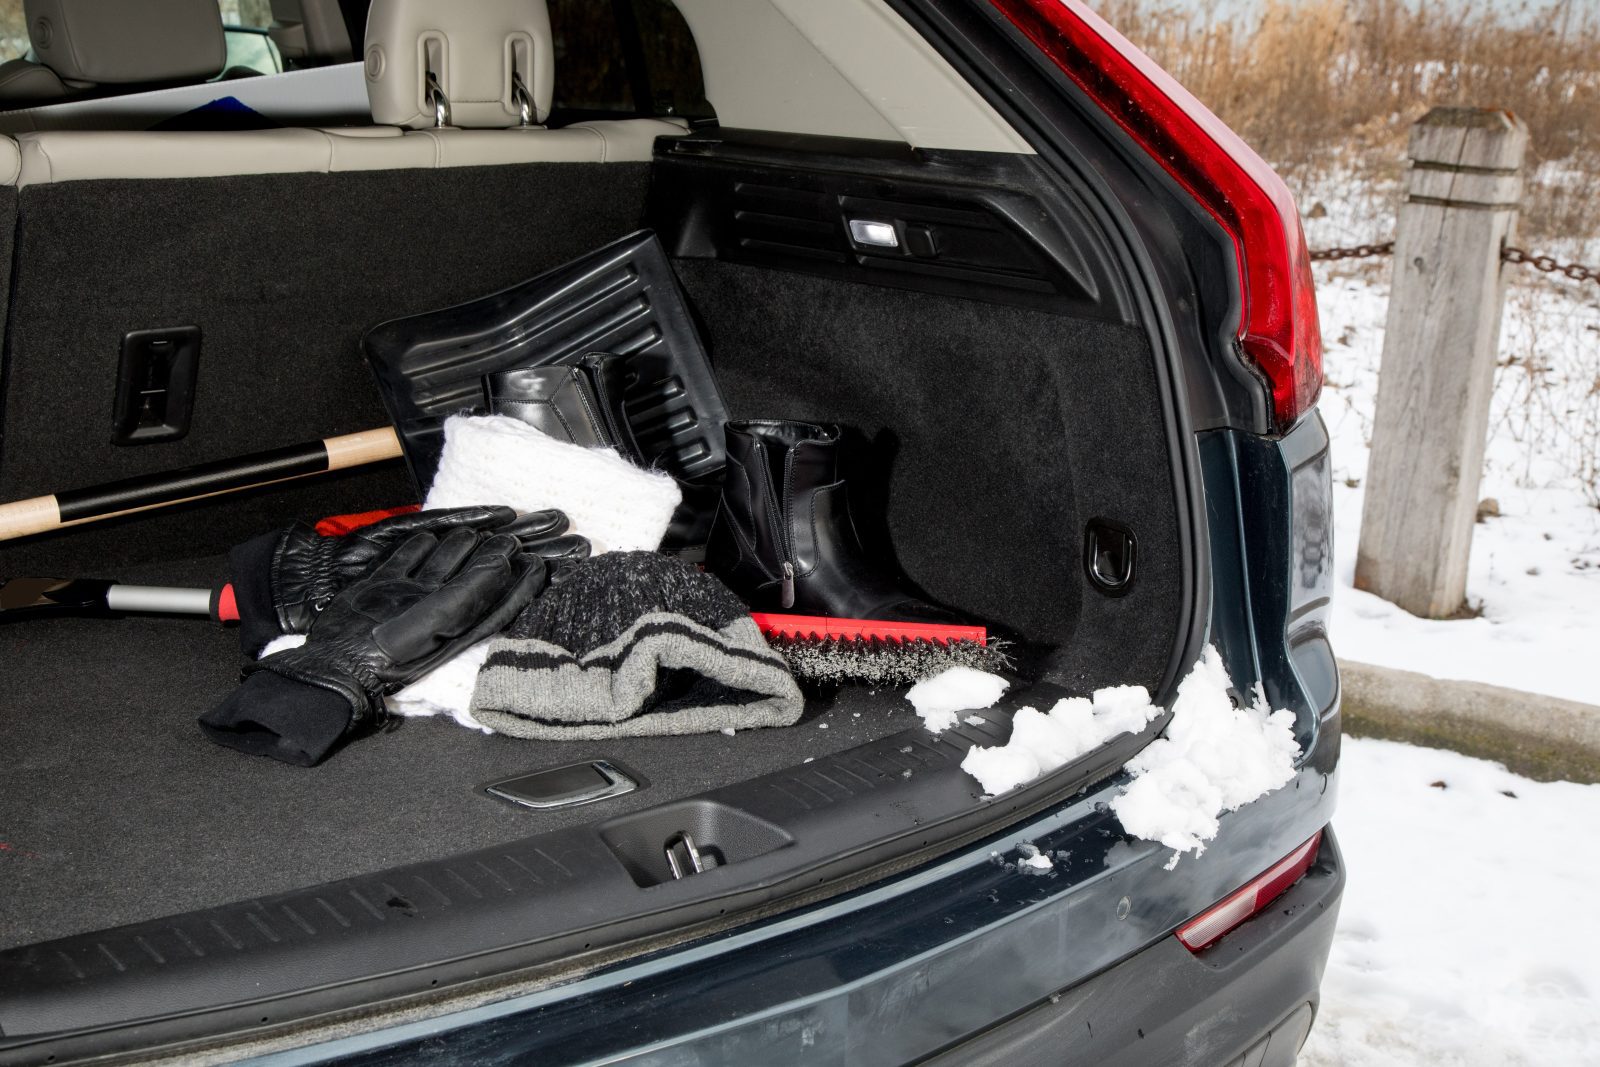 packing a car emergency kit in winter